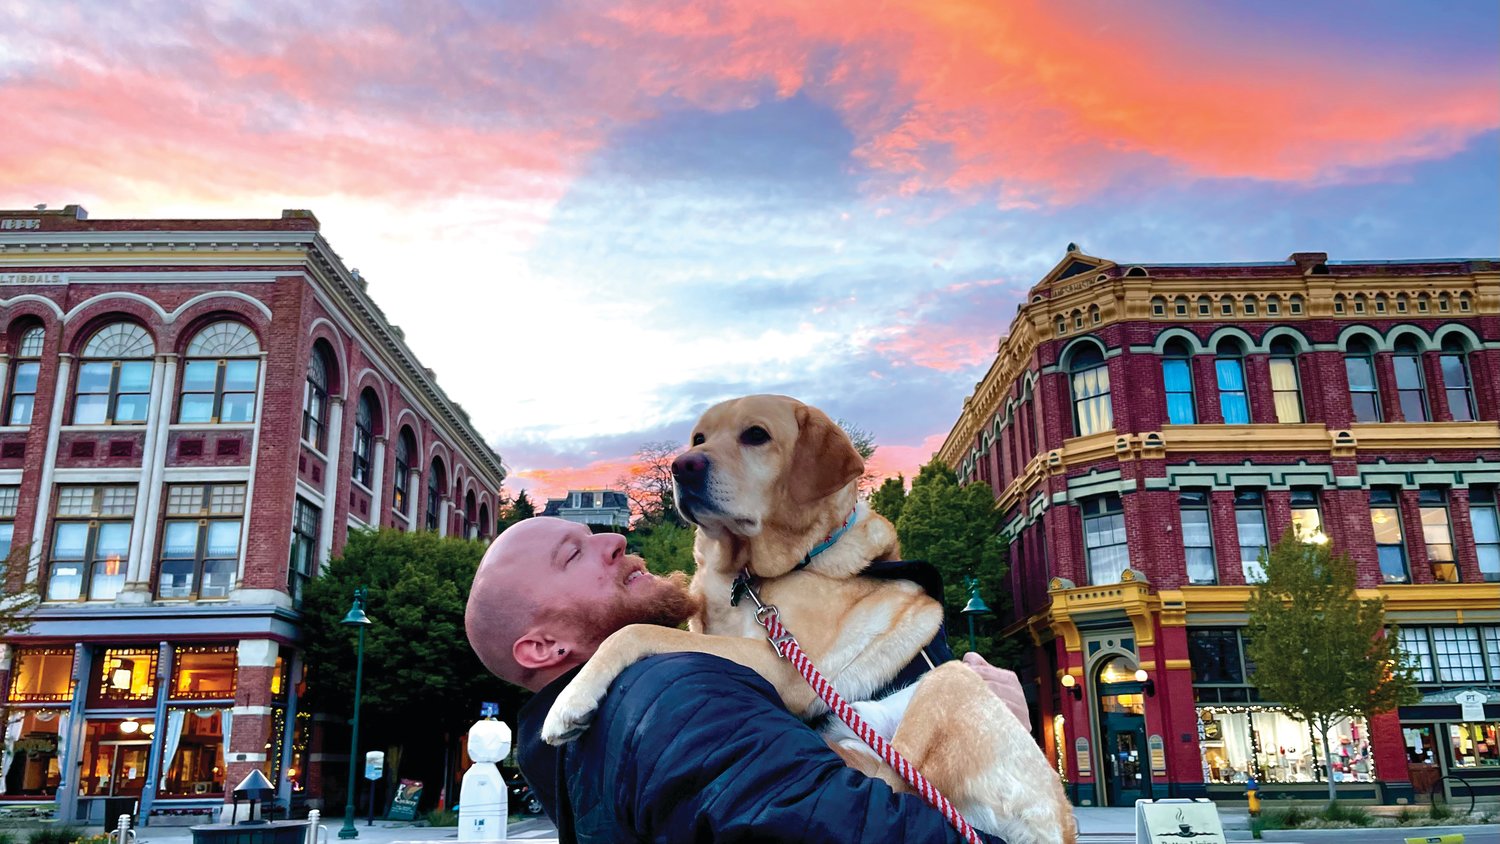 Port Townsend resident and Marine Corps veteran Zaque Harig with his beloved service dog Freedom in downtown Port Townsend.